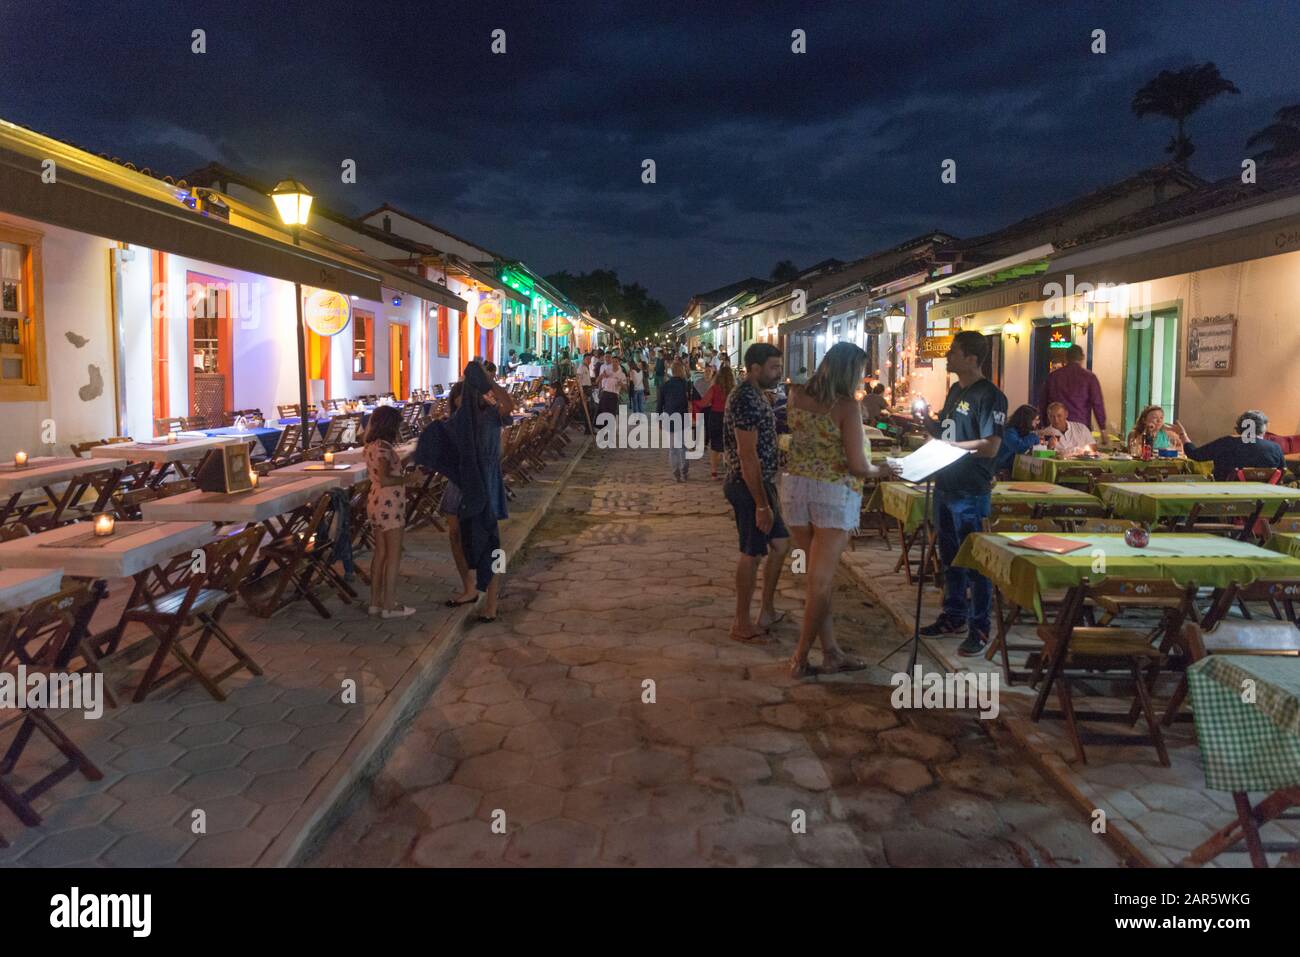 Pirenópolis, Goiás, Brazil. 18th July 2019. Nightlife at Rua do Lazer in Pirenópolis. Tourists looking at menu of a restaurant in the evening. Stock Photo